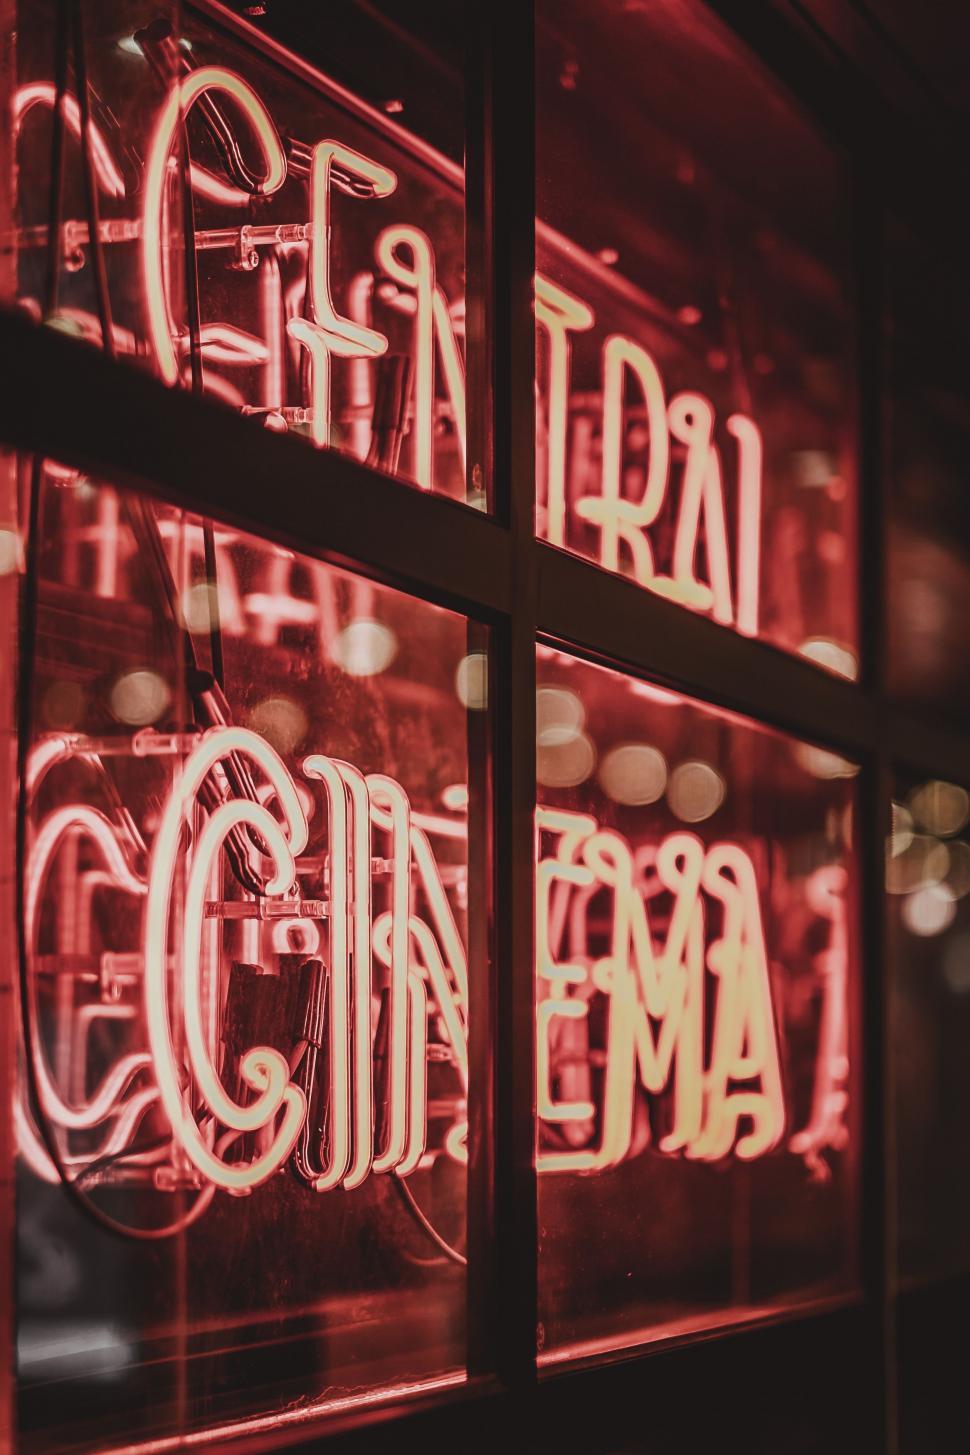 Free Image of Vibrant Red Neon Sign in Store Window 